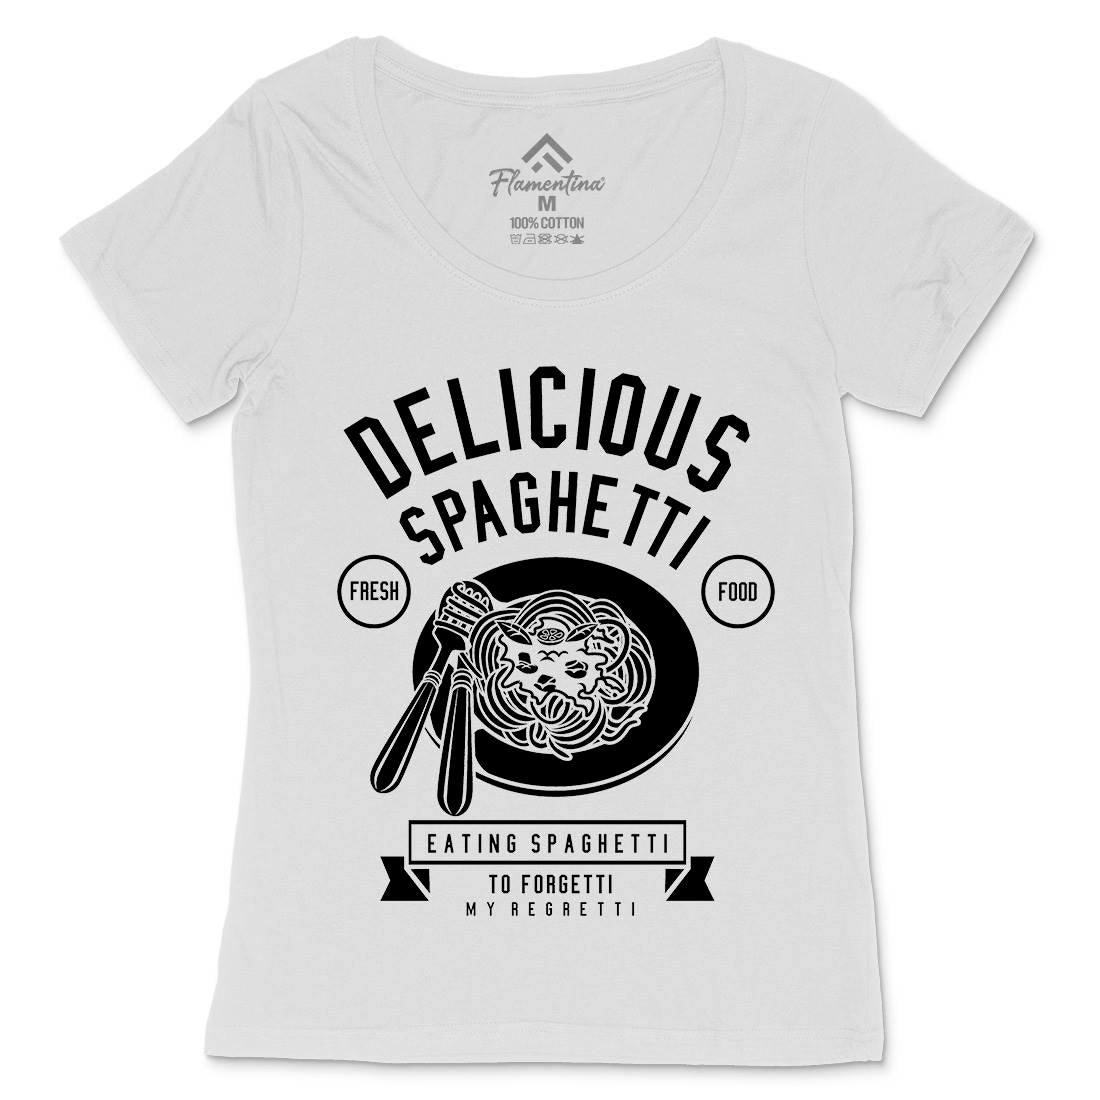 Delicious Spaghetti Womens Scoop Neck T-Shirt Food B530